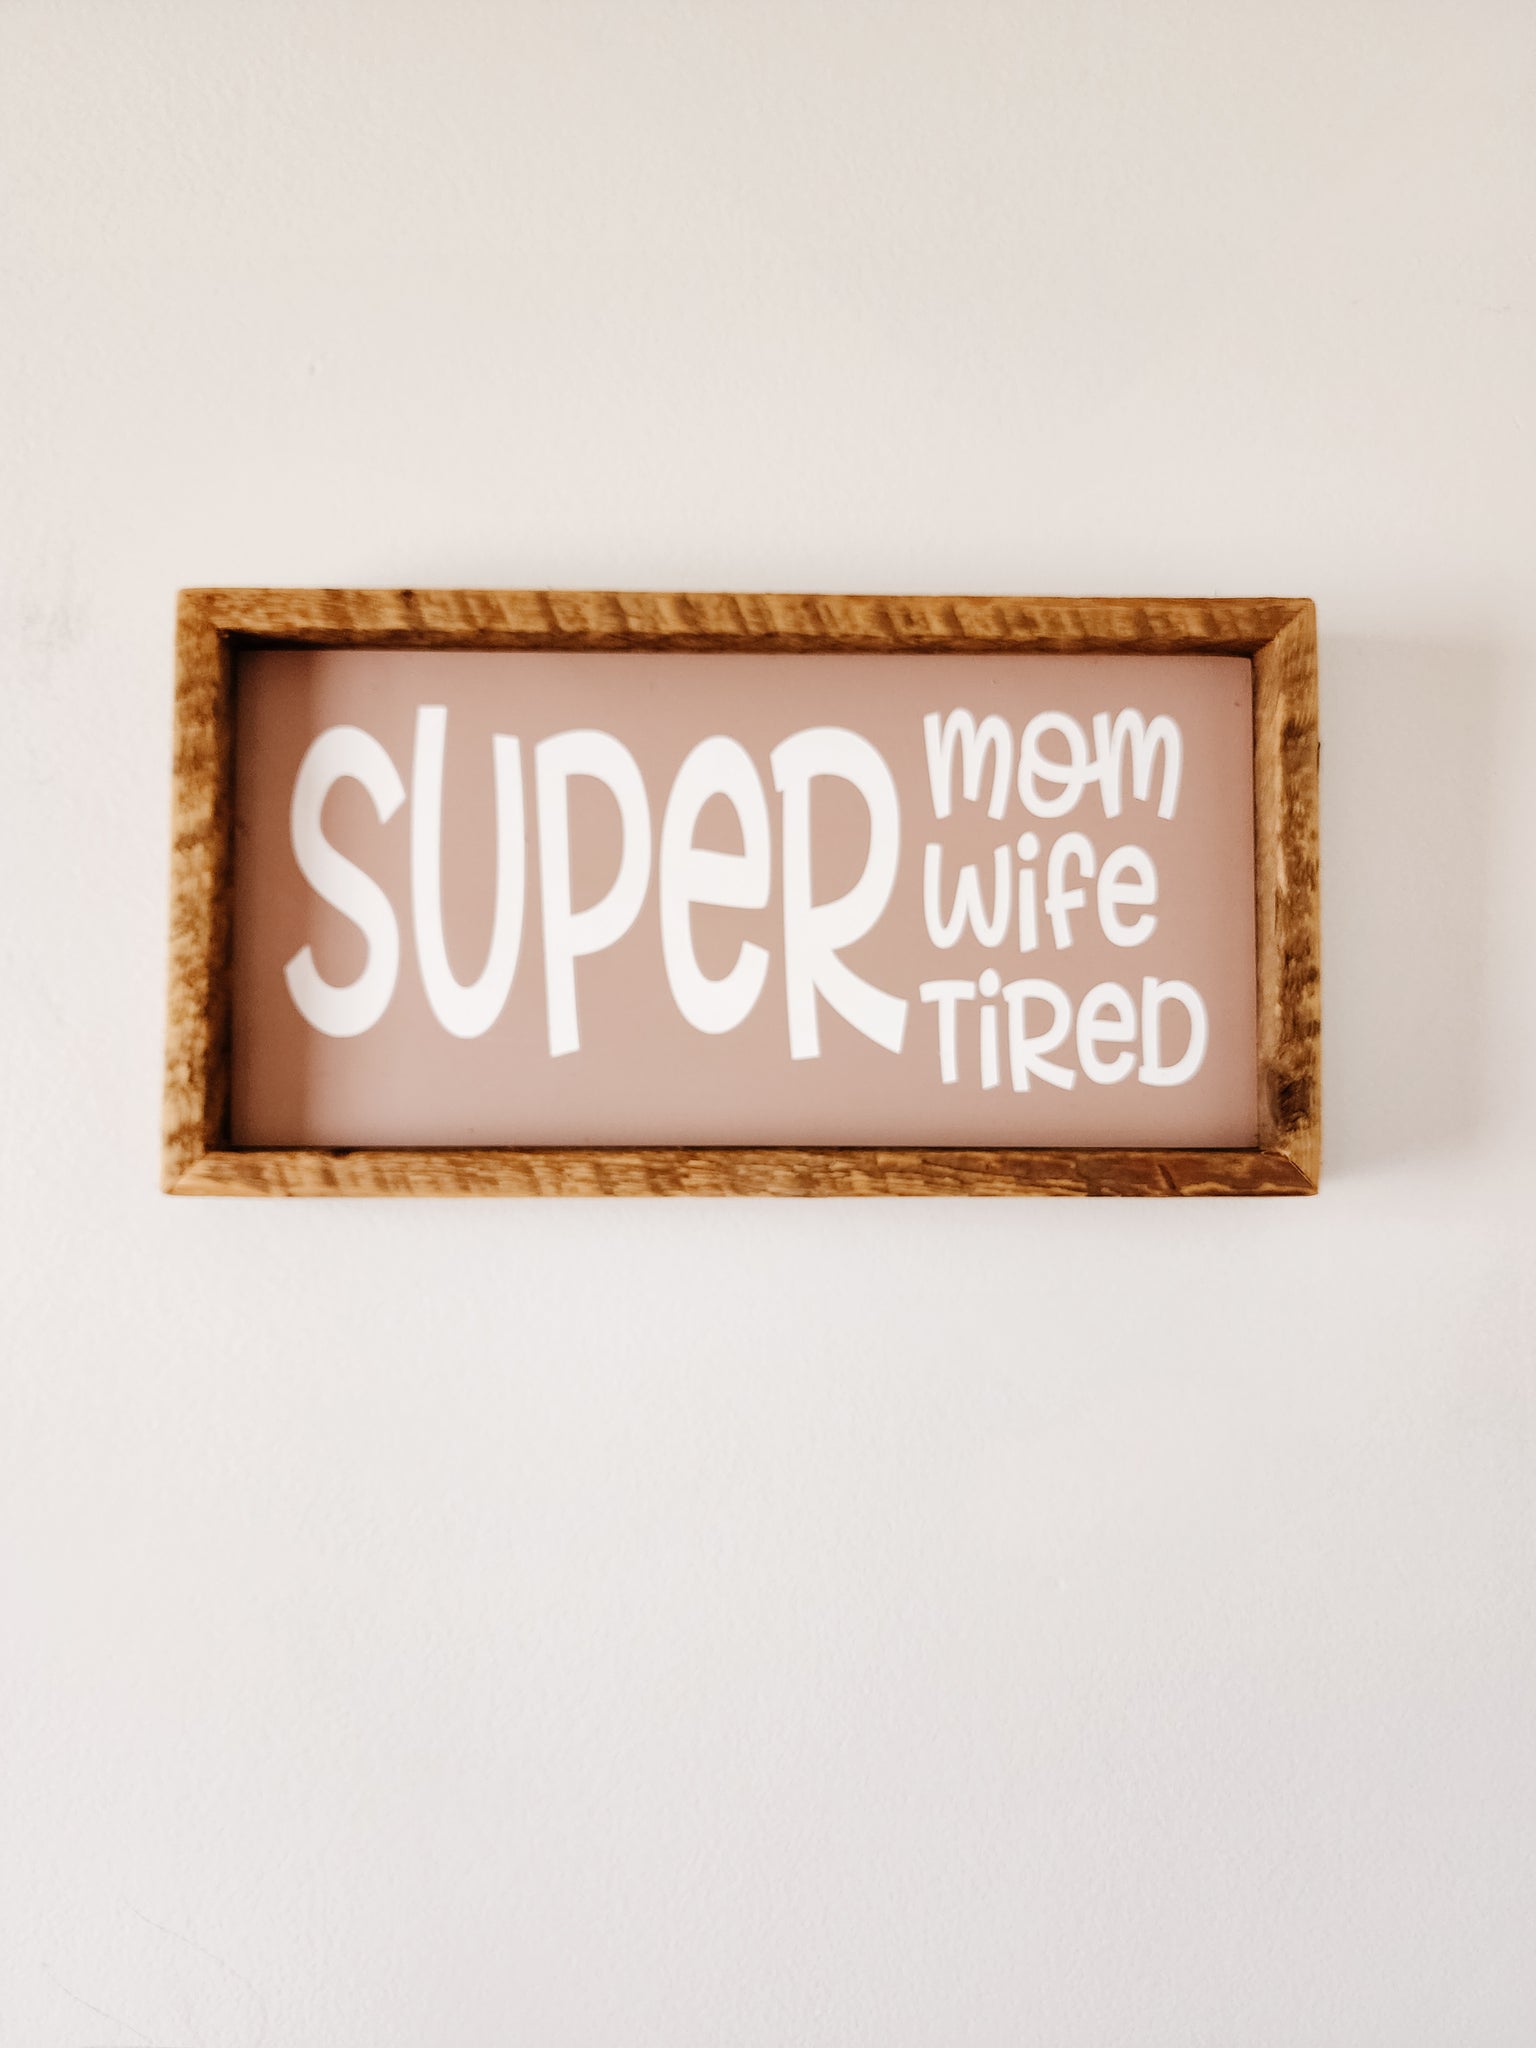 7x13 Super mom, wife, tired  sign